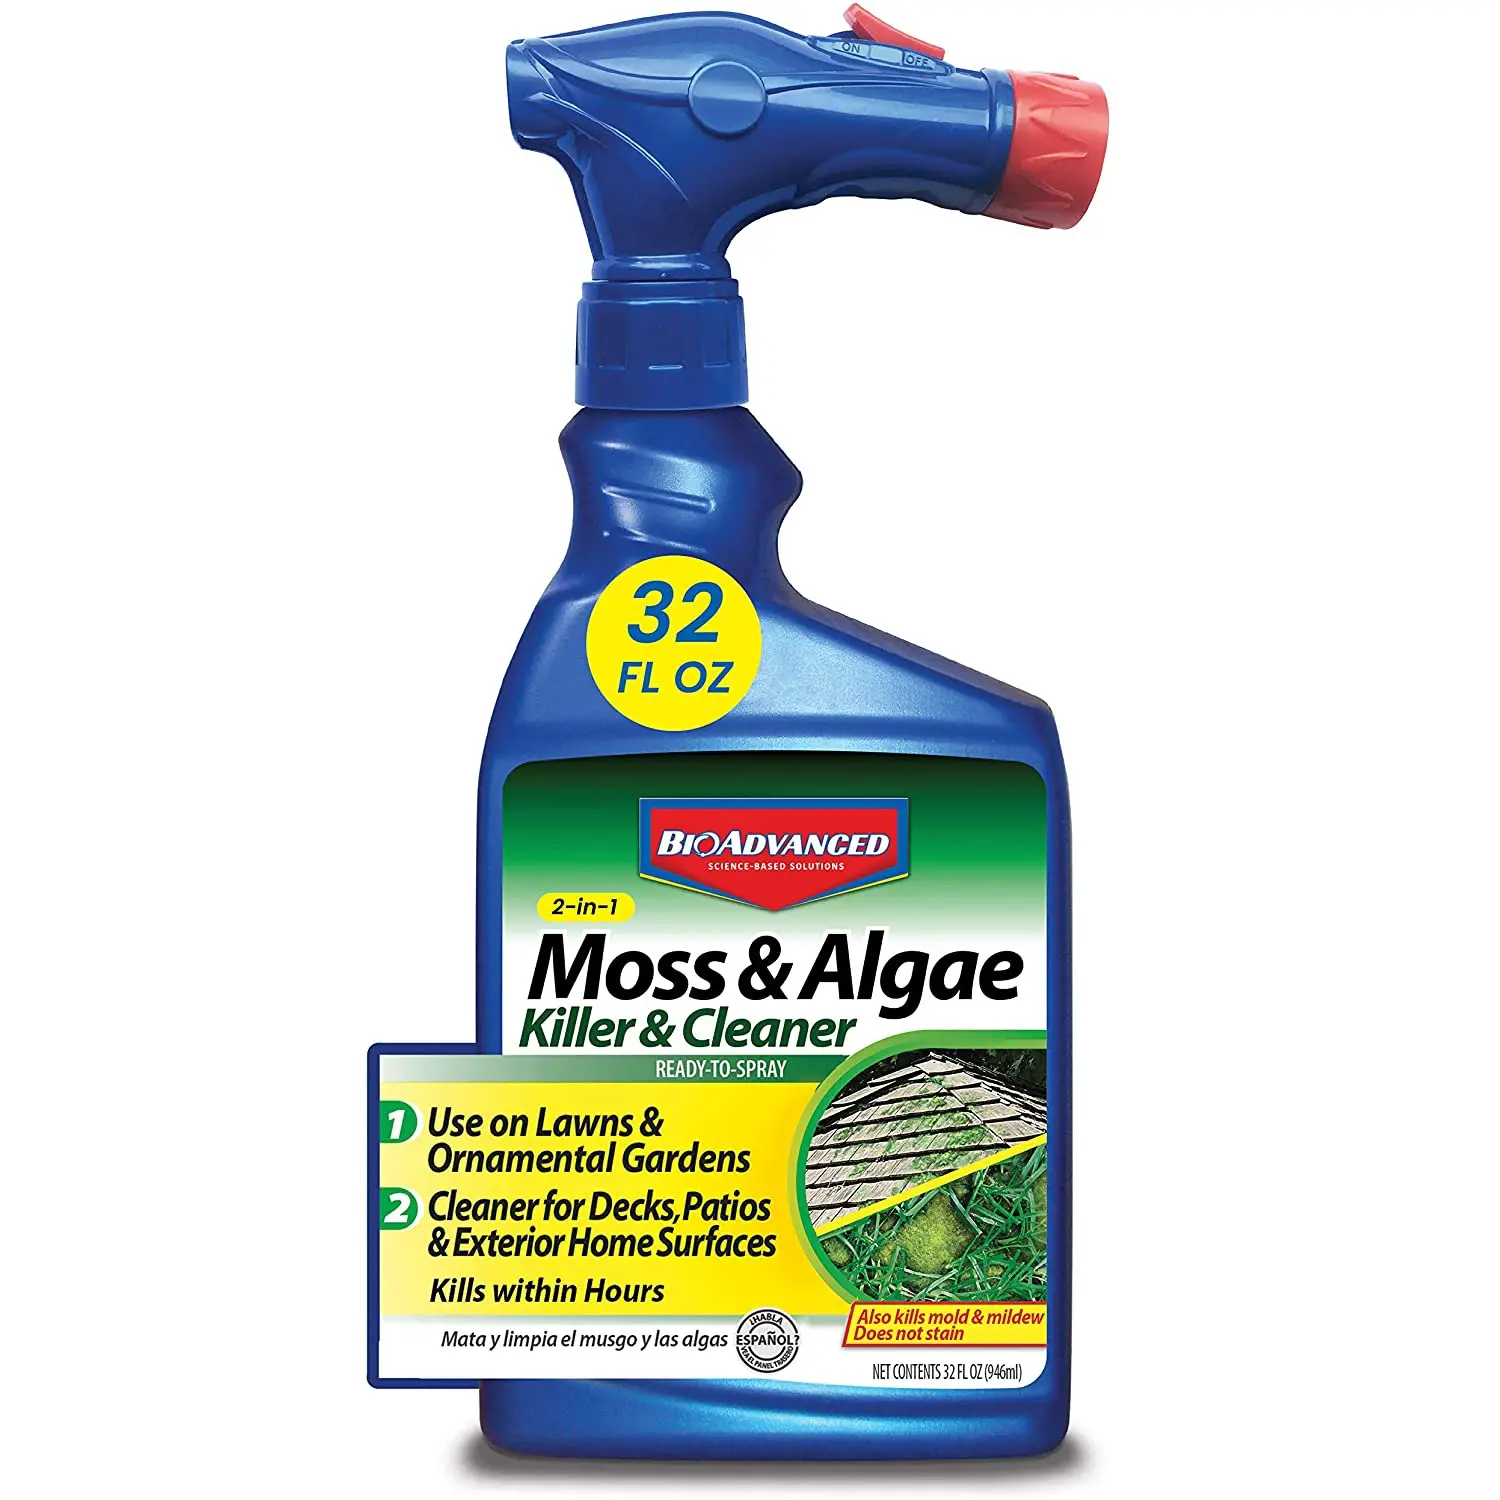 Top 5 Best Moss Killers for Lawns [2021 Review]